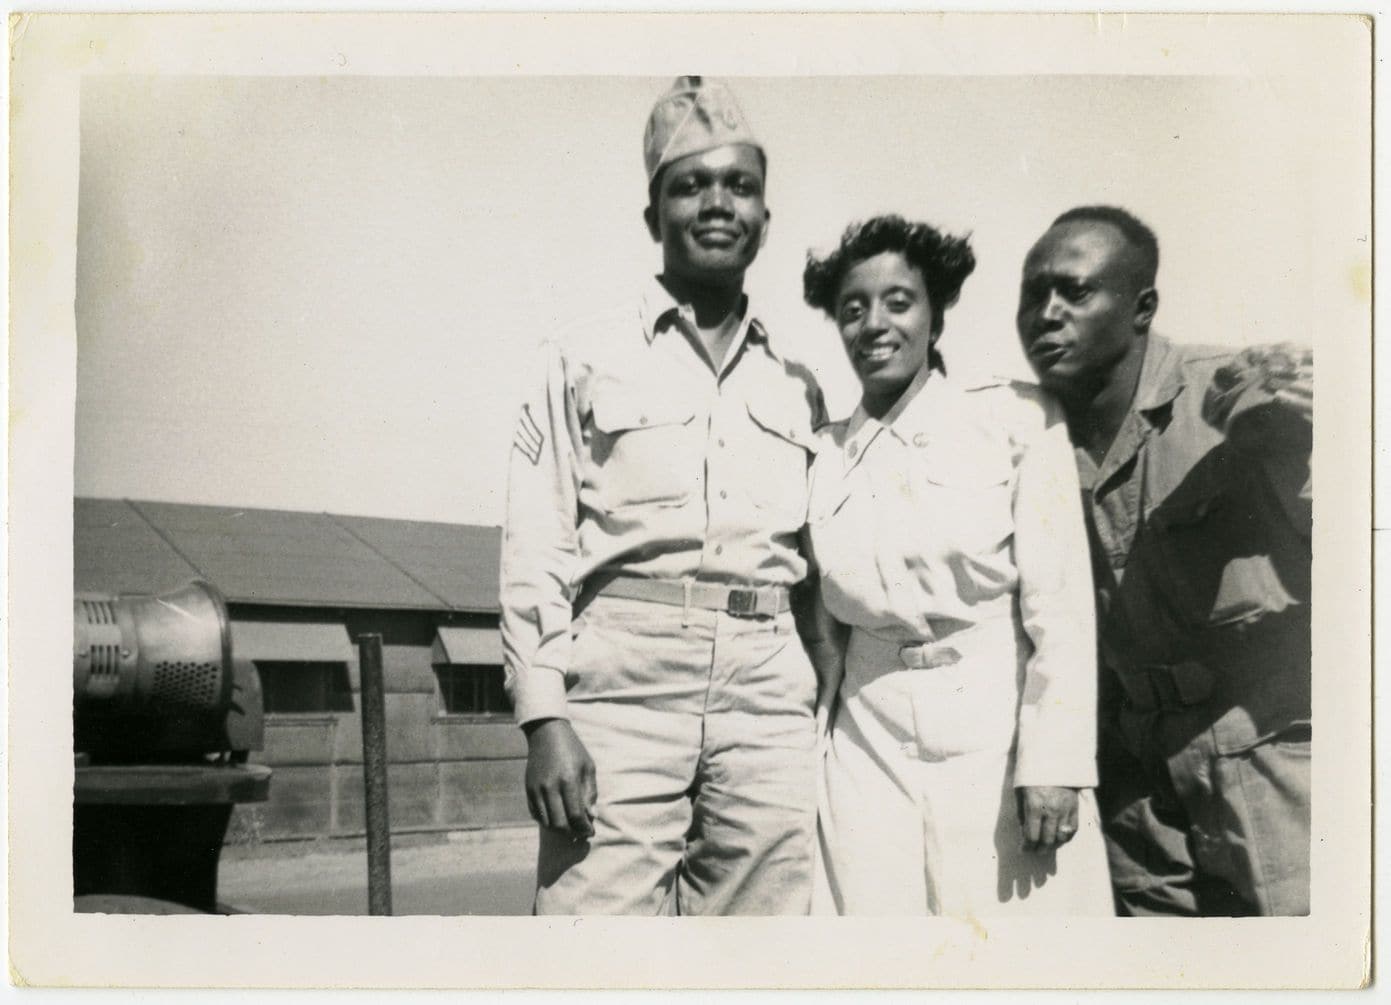 Historic image of Bernice Thomas Middleton and two unidentified servicemen